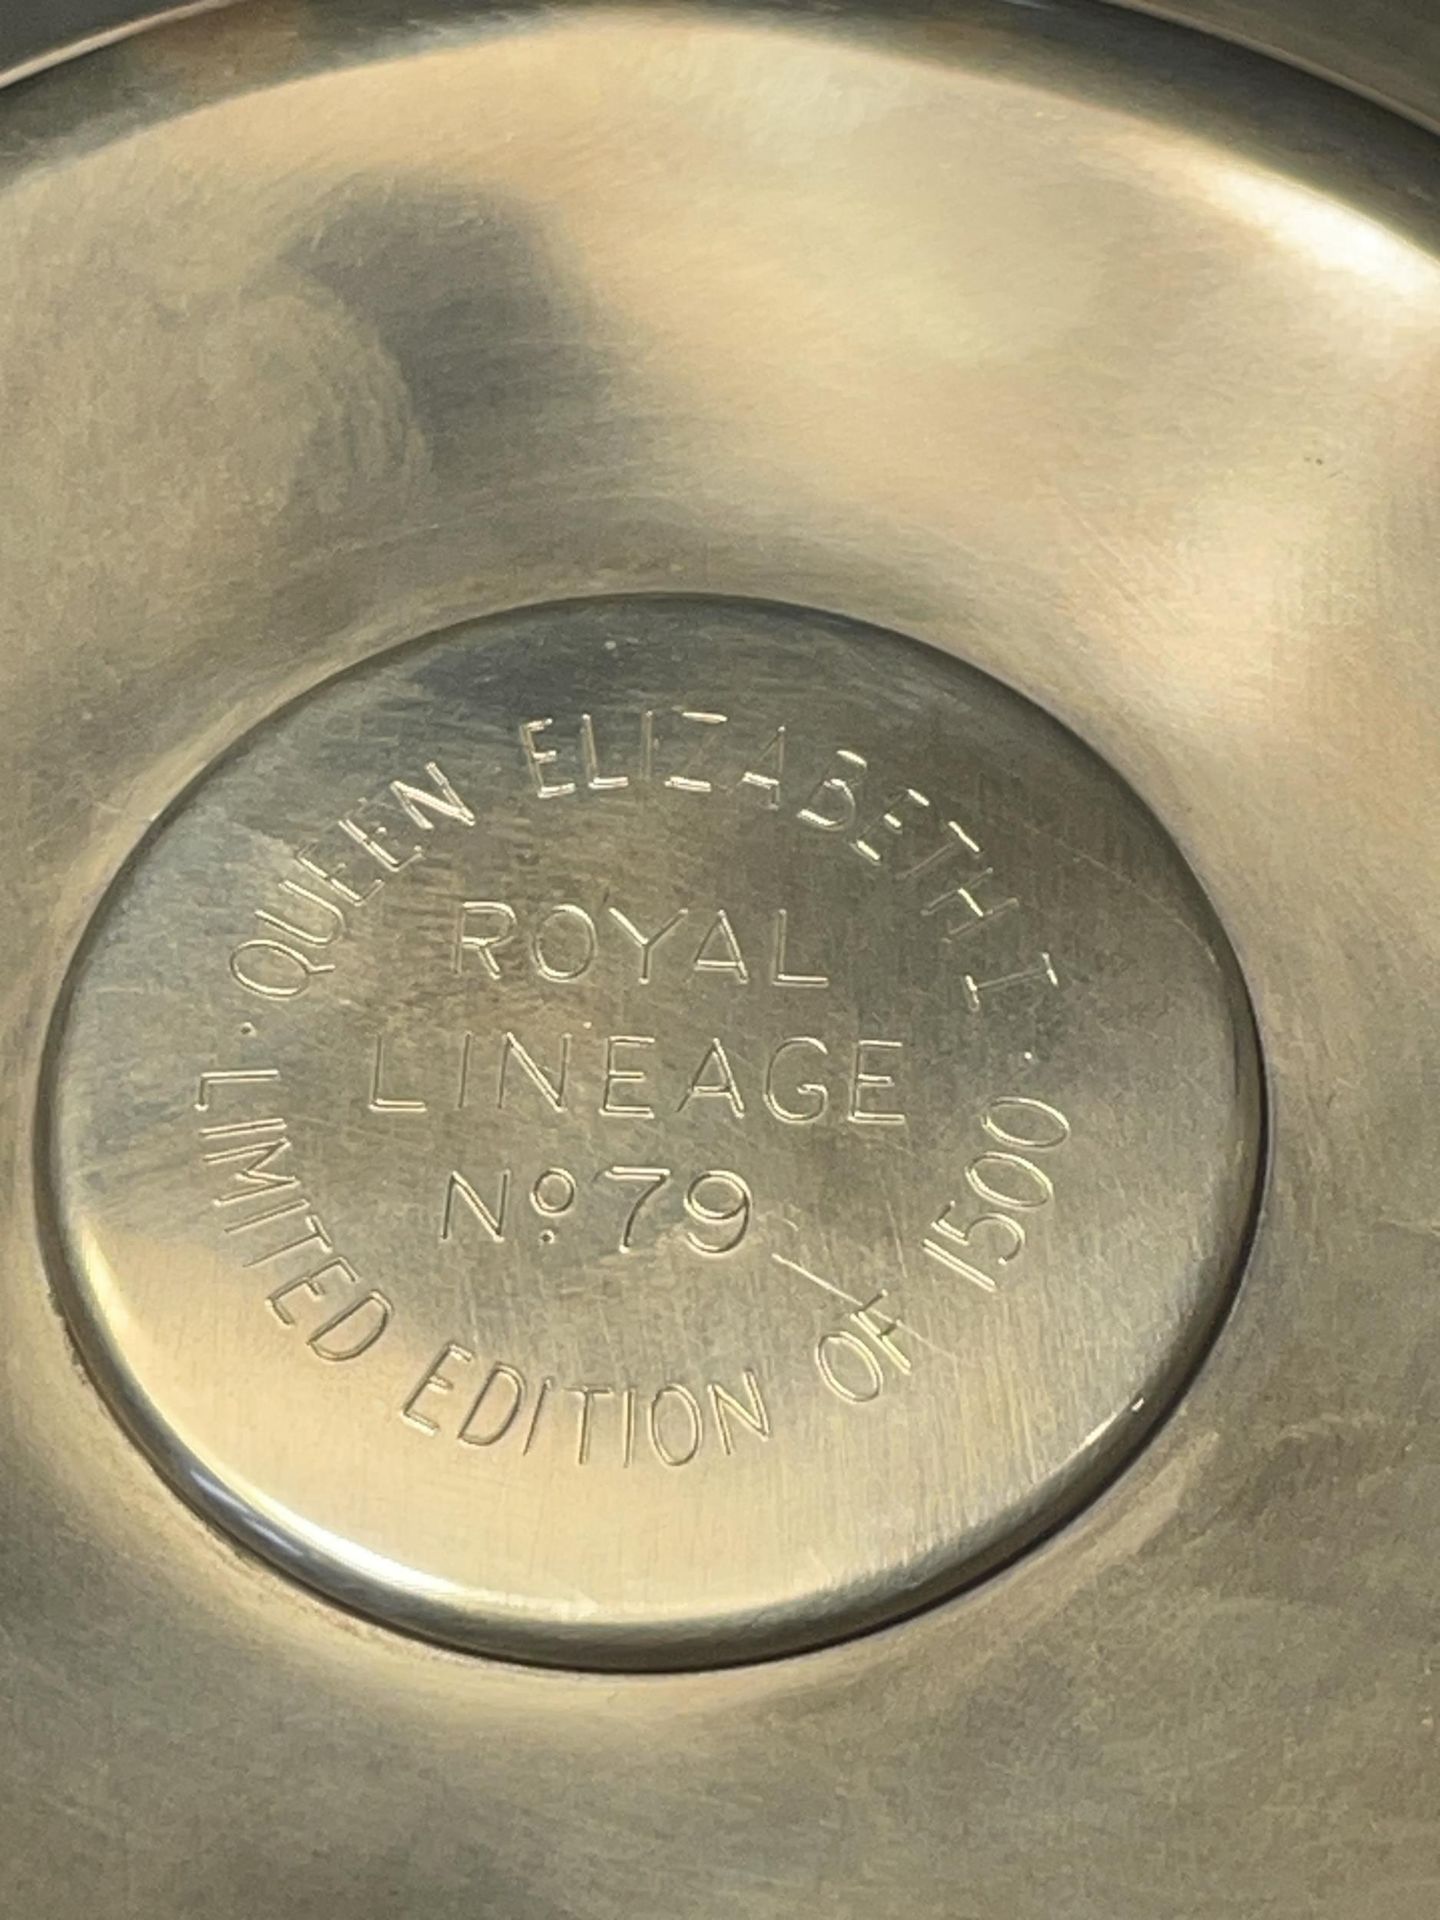 A HALLMARKED LONDON SILVER QUEEN ELIZABETH I ROYAL LINEAGE NO.79 LIMITED EDITION OF 1500 DISH - Image 5 of 5